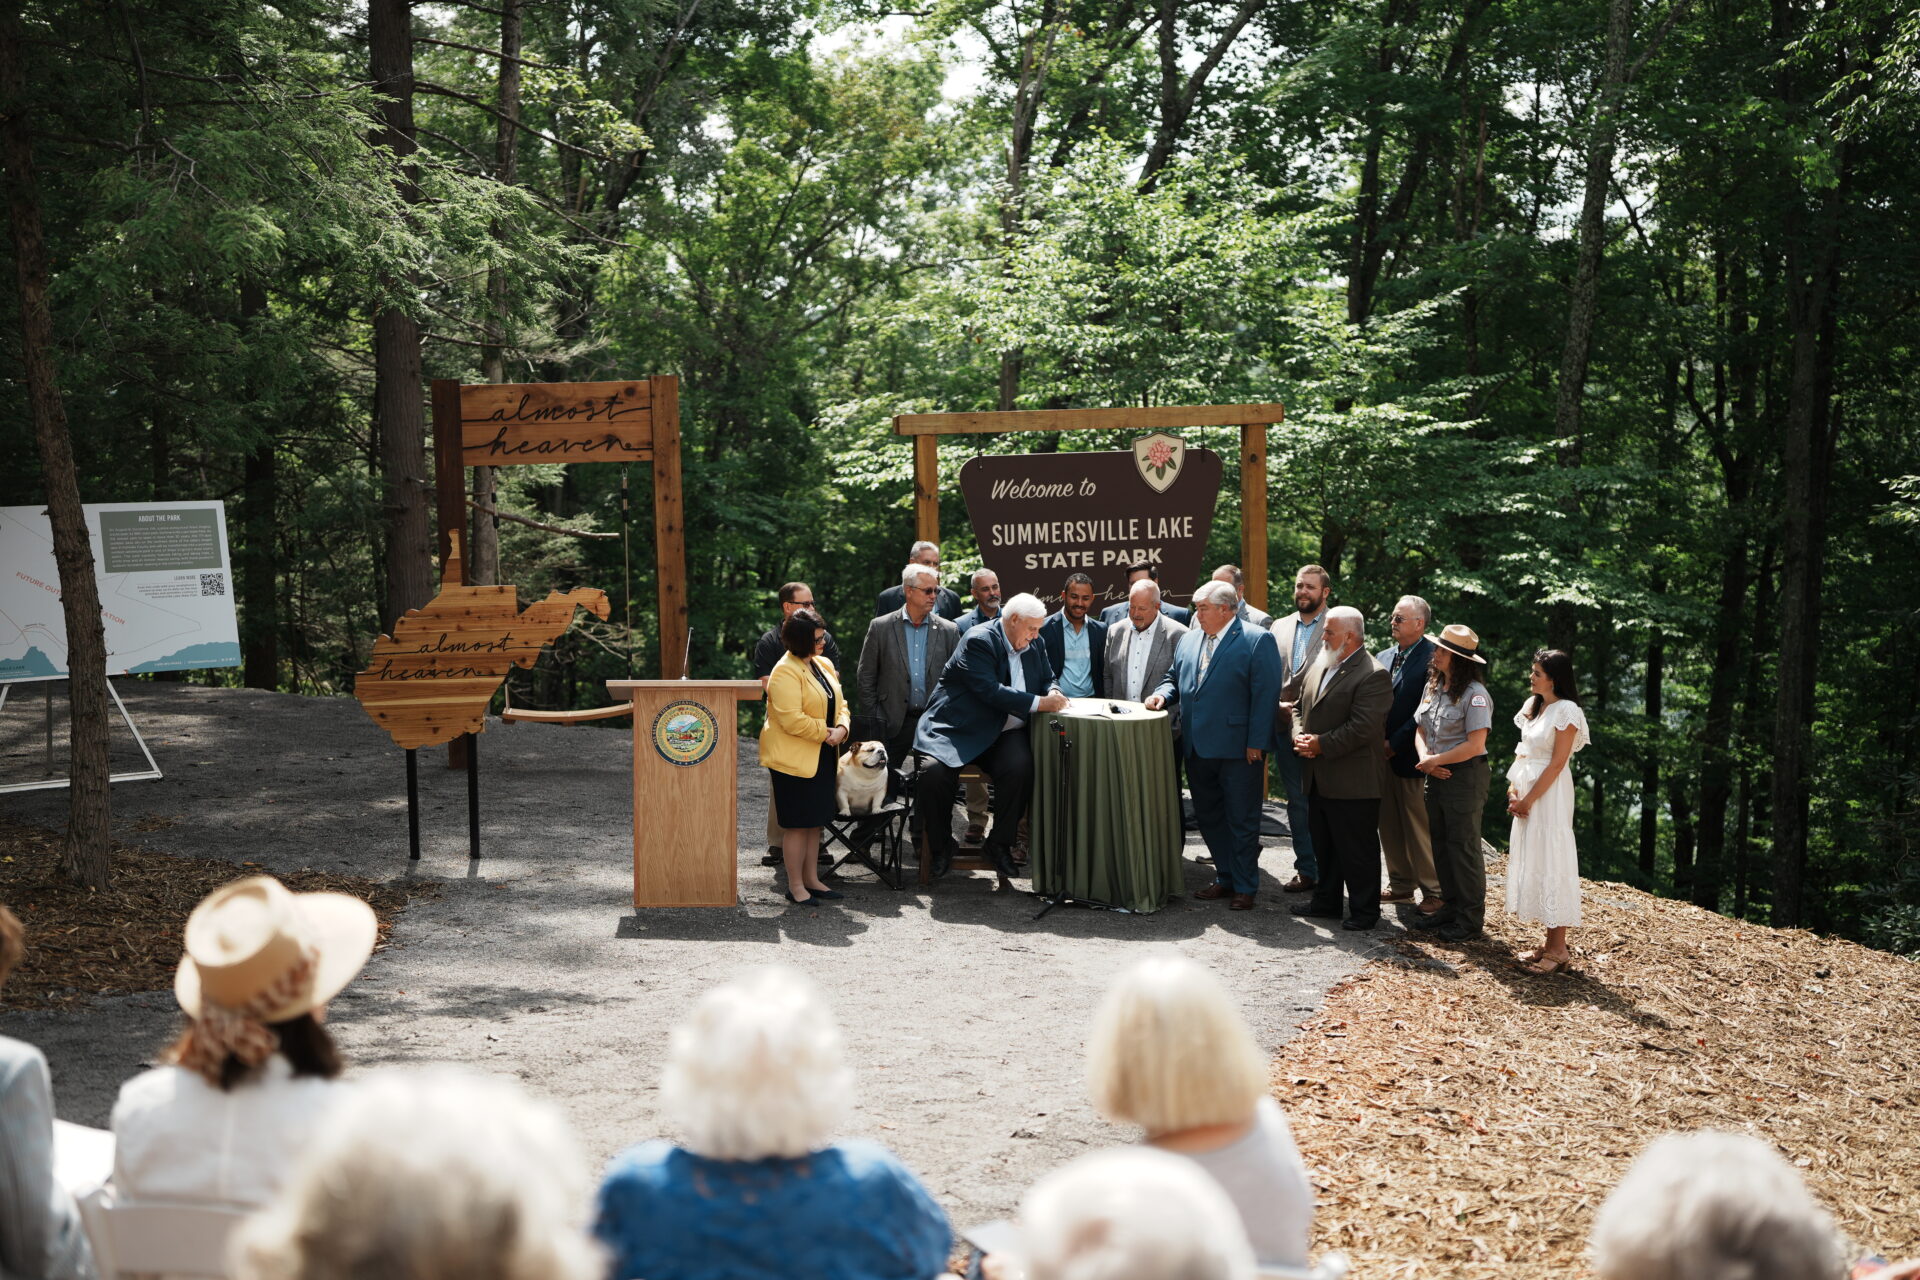 In a forest, a group of people stand and pose as Governor Jim Justice signs a bill into law.